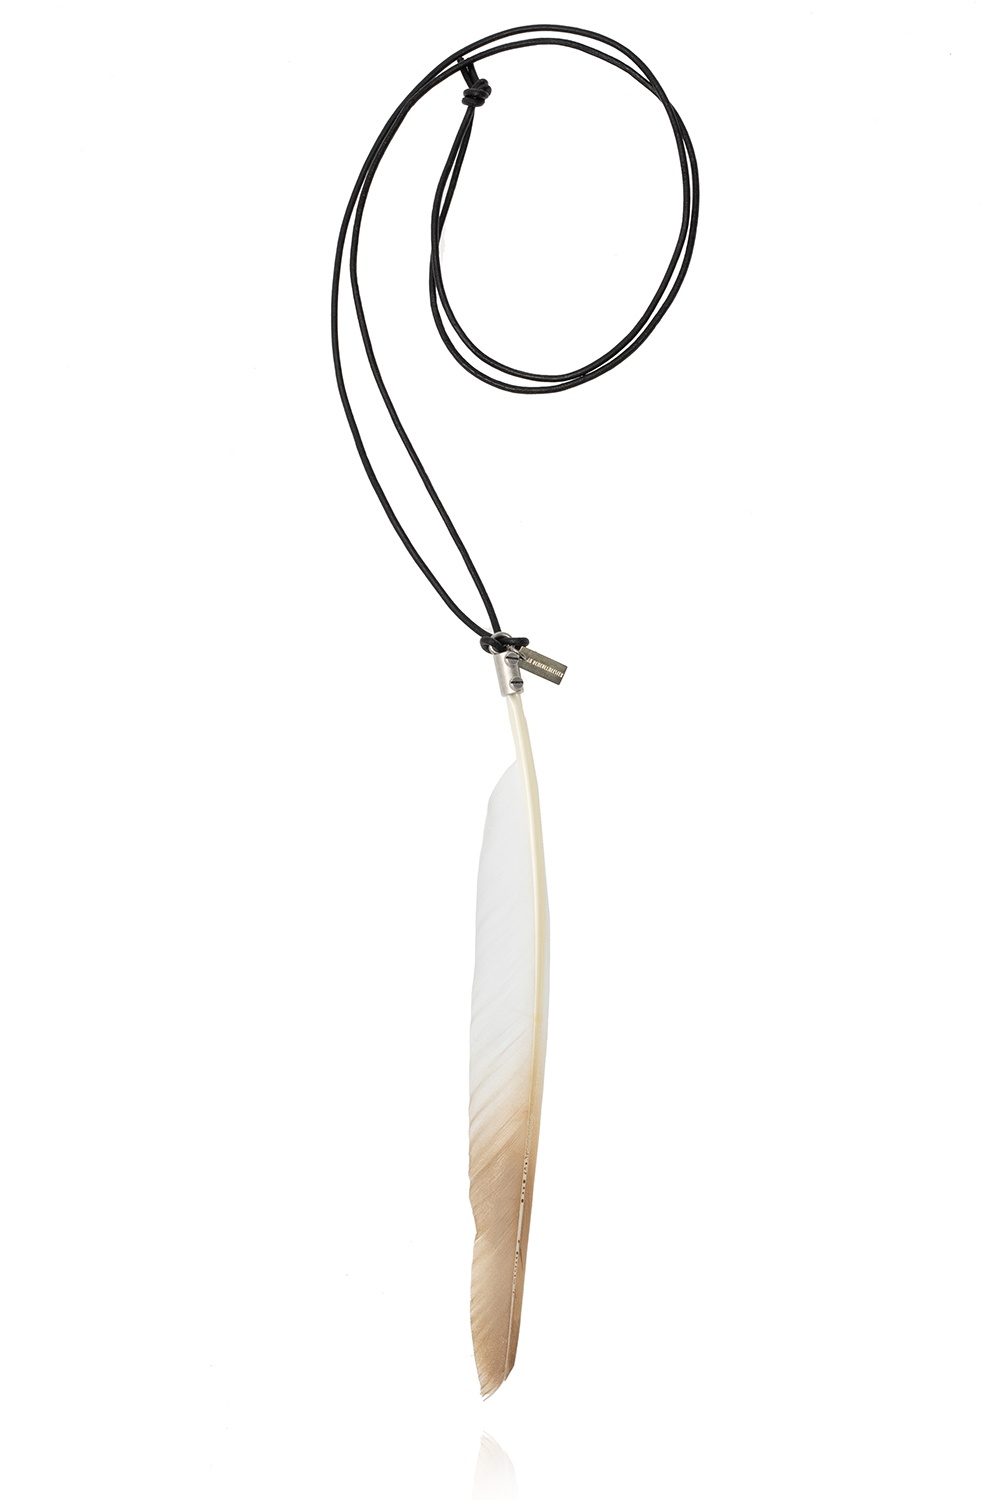 ANN DEMEULEMEESTER NECKLACE FEATHERCURLY82cmトップの大きさ